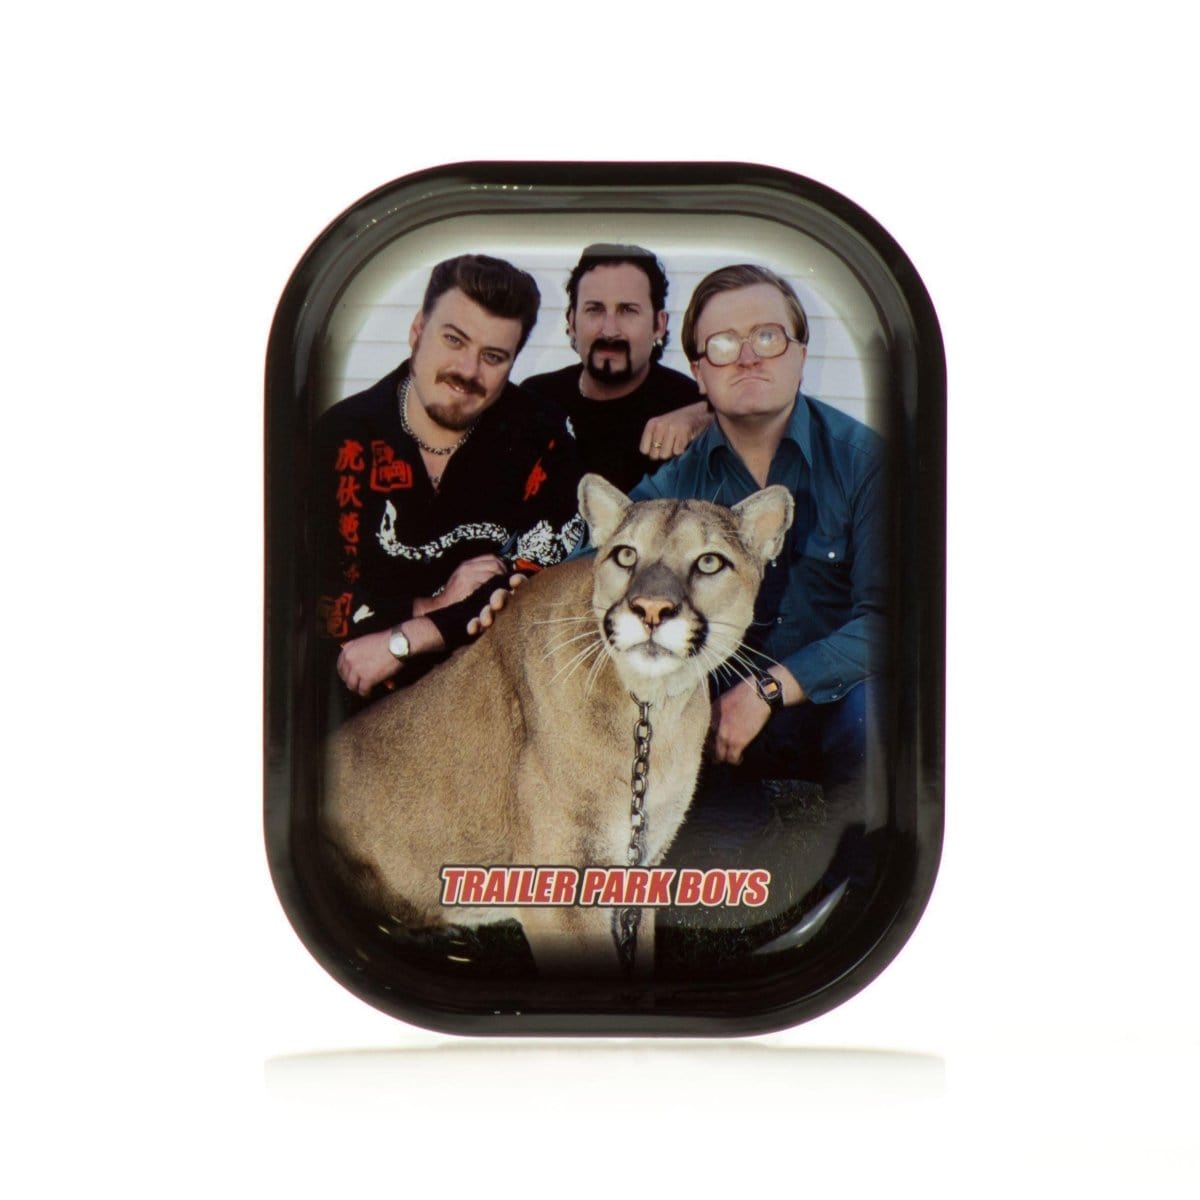 Trailer Park Boys Rolling Tray Small Big Kitty Rolling Tray